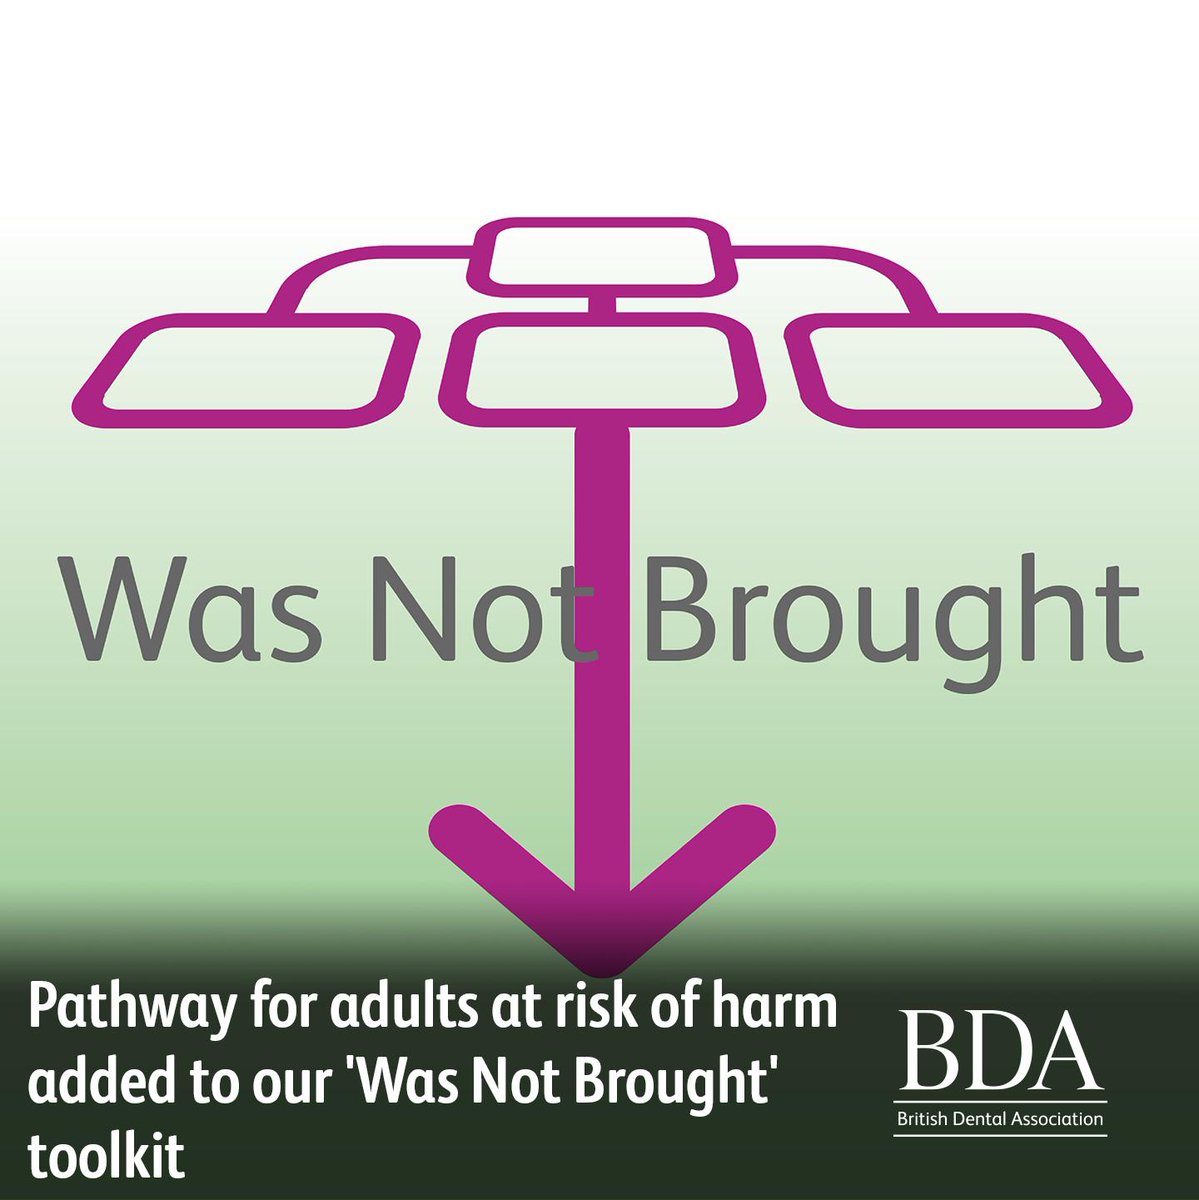 Our 'Was Not Brought' (WNB) toolkit has been further extended to help dental teams safeguard adults at risk of harm (AAR) if they miss dental appointments. Access it now: bit.ly/3UFelU6